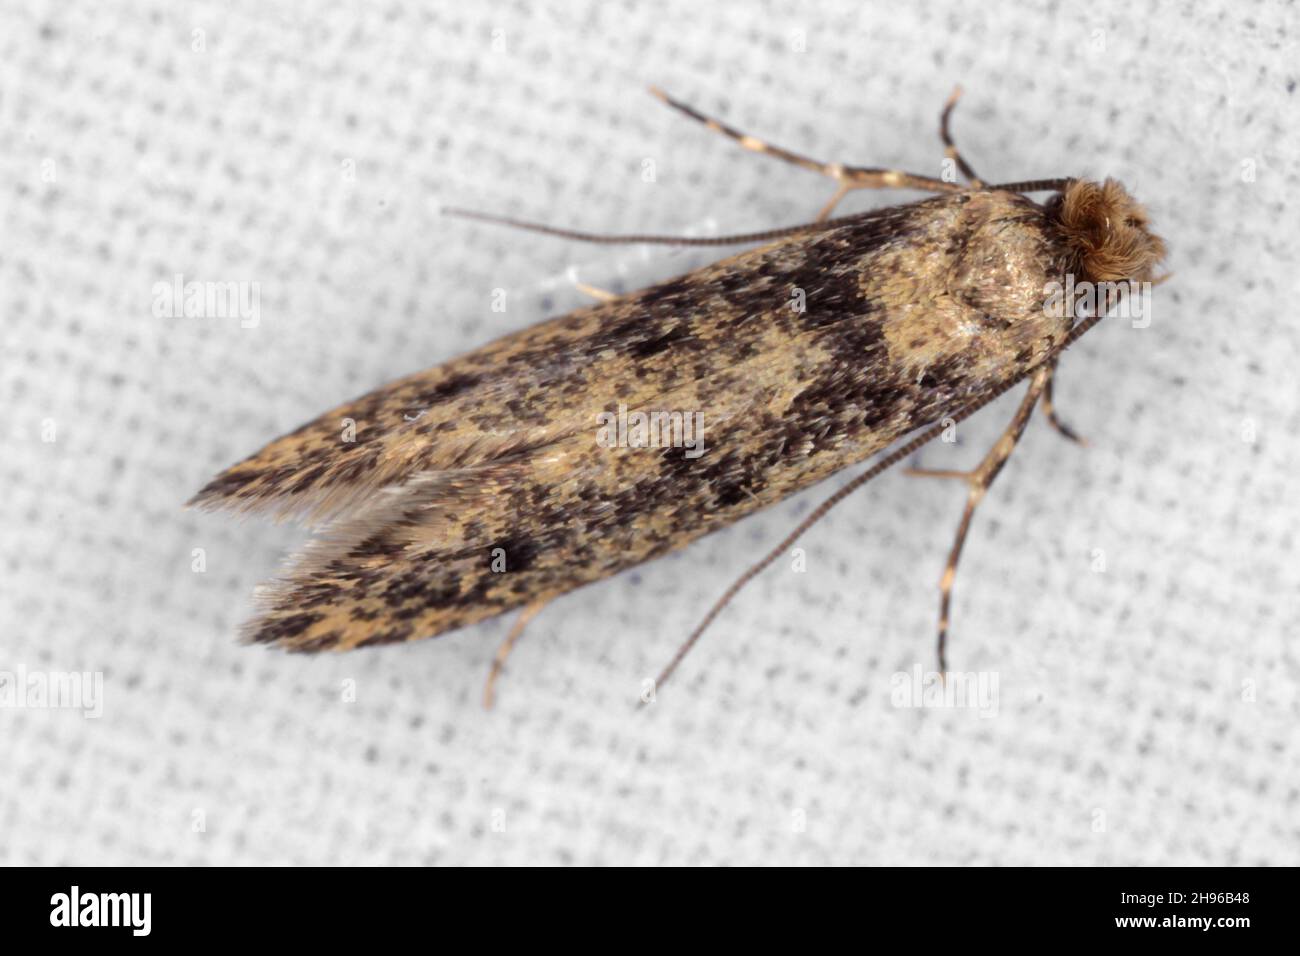 The brown-dotted clothes moth Niditinea fuscella is a species of tineoid moth. It belongs to the fungus moth family Tineidae. Common house moth. Stock Photo